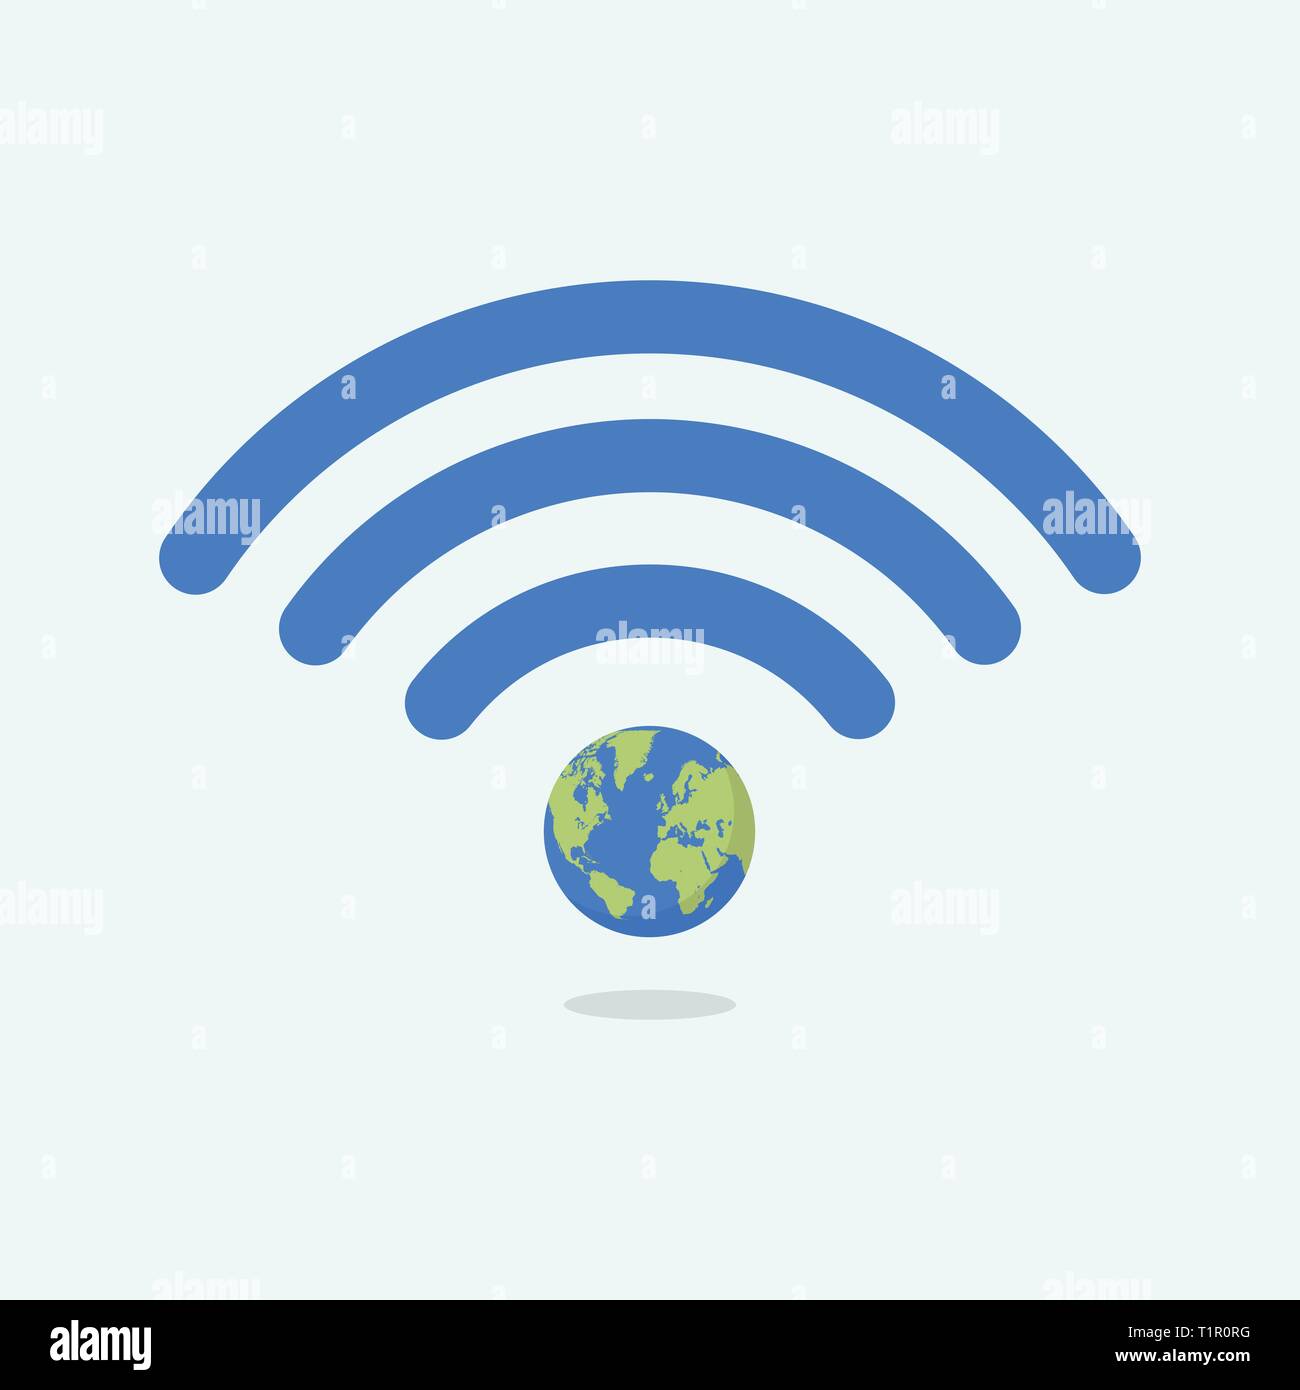 Wifi symbol with planet earth. Vector illustration Stock Vector